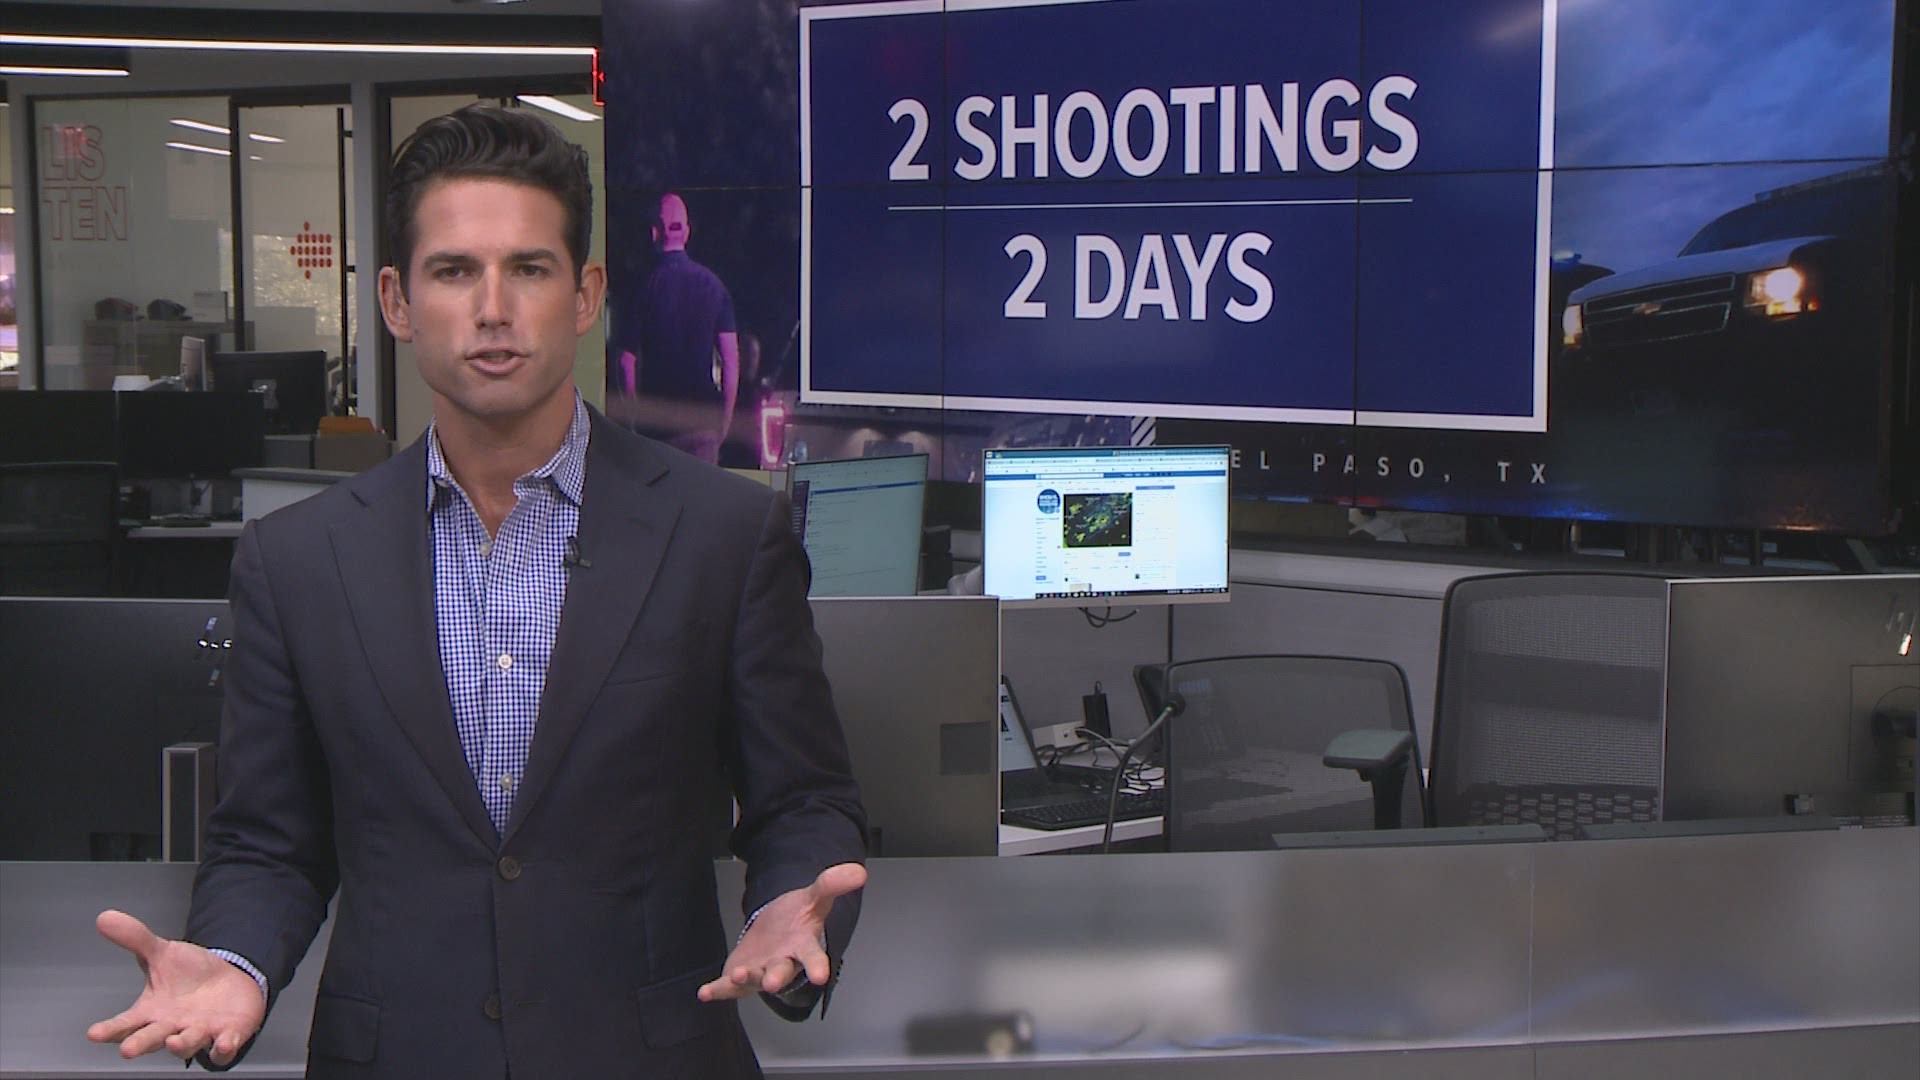 KHOU 11 mental health expert Bill Prasad says there are some common characteristics shared by most mass shooters. The two suspects in the Dayton, Ohio and El Paso shootings appear to share them.